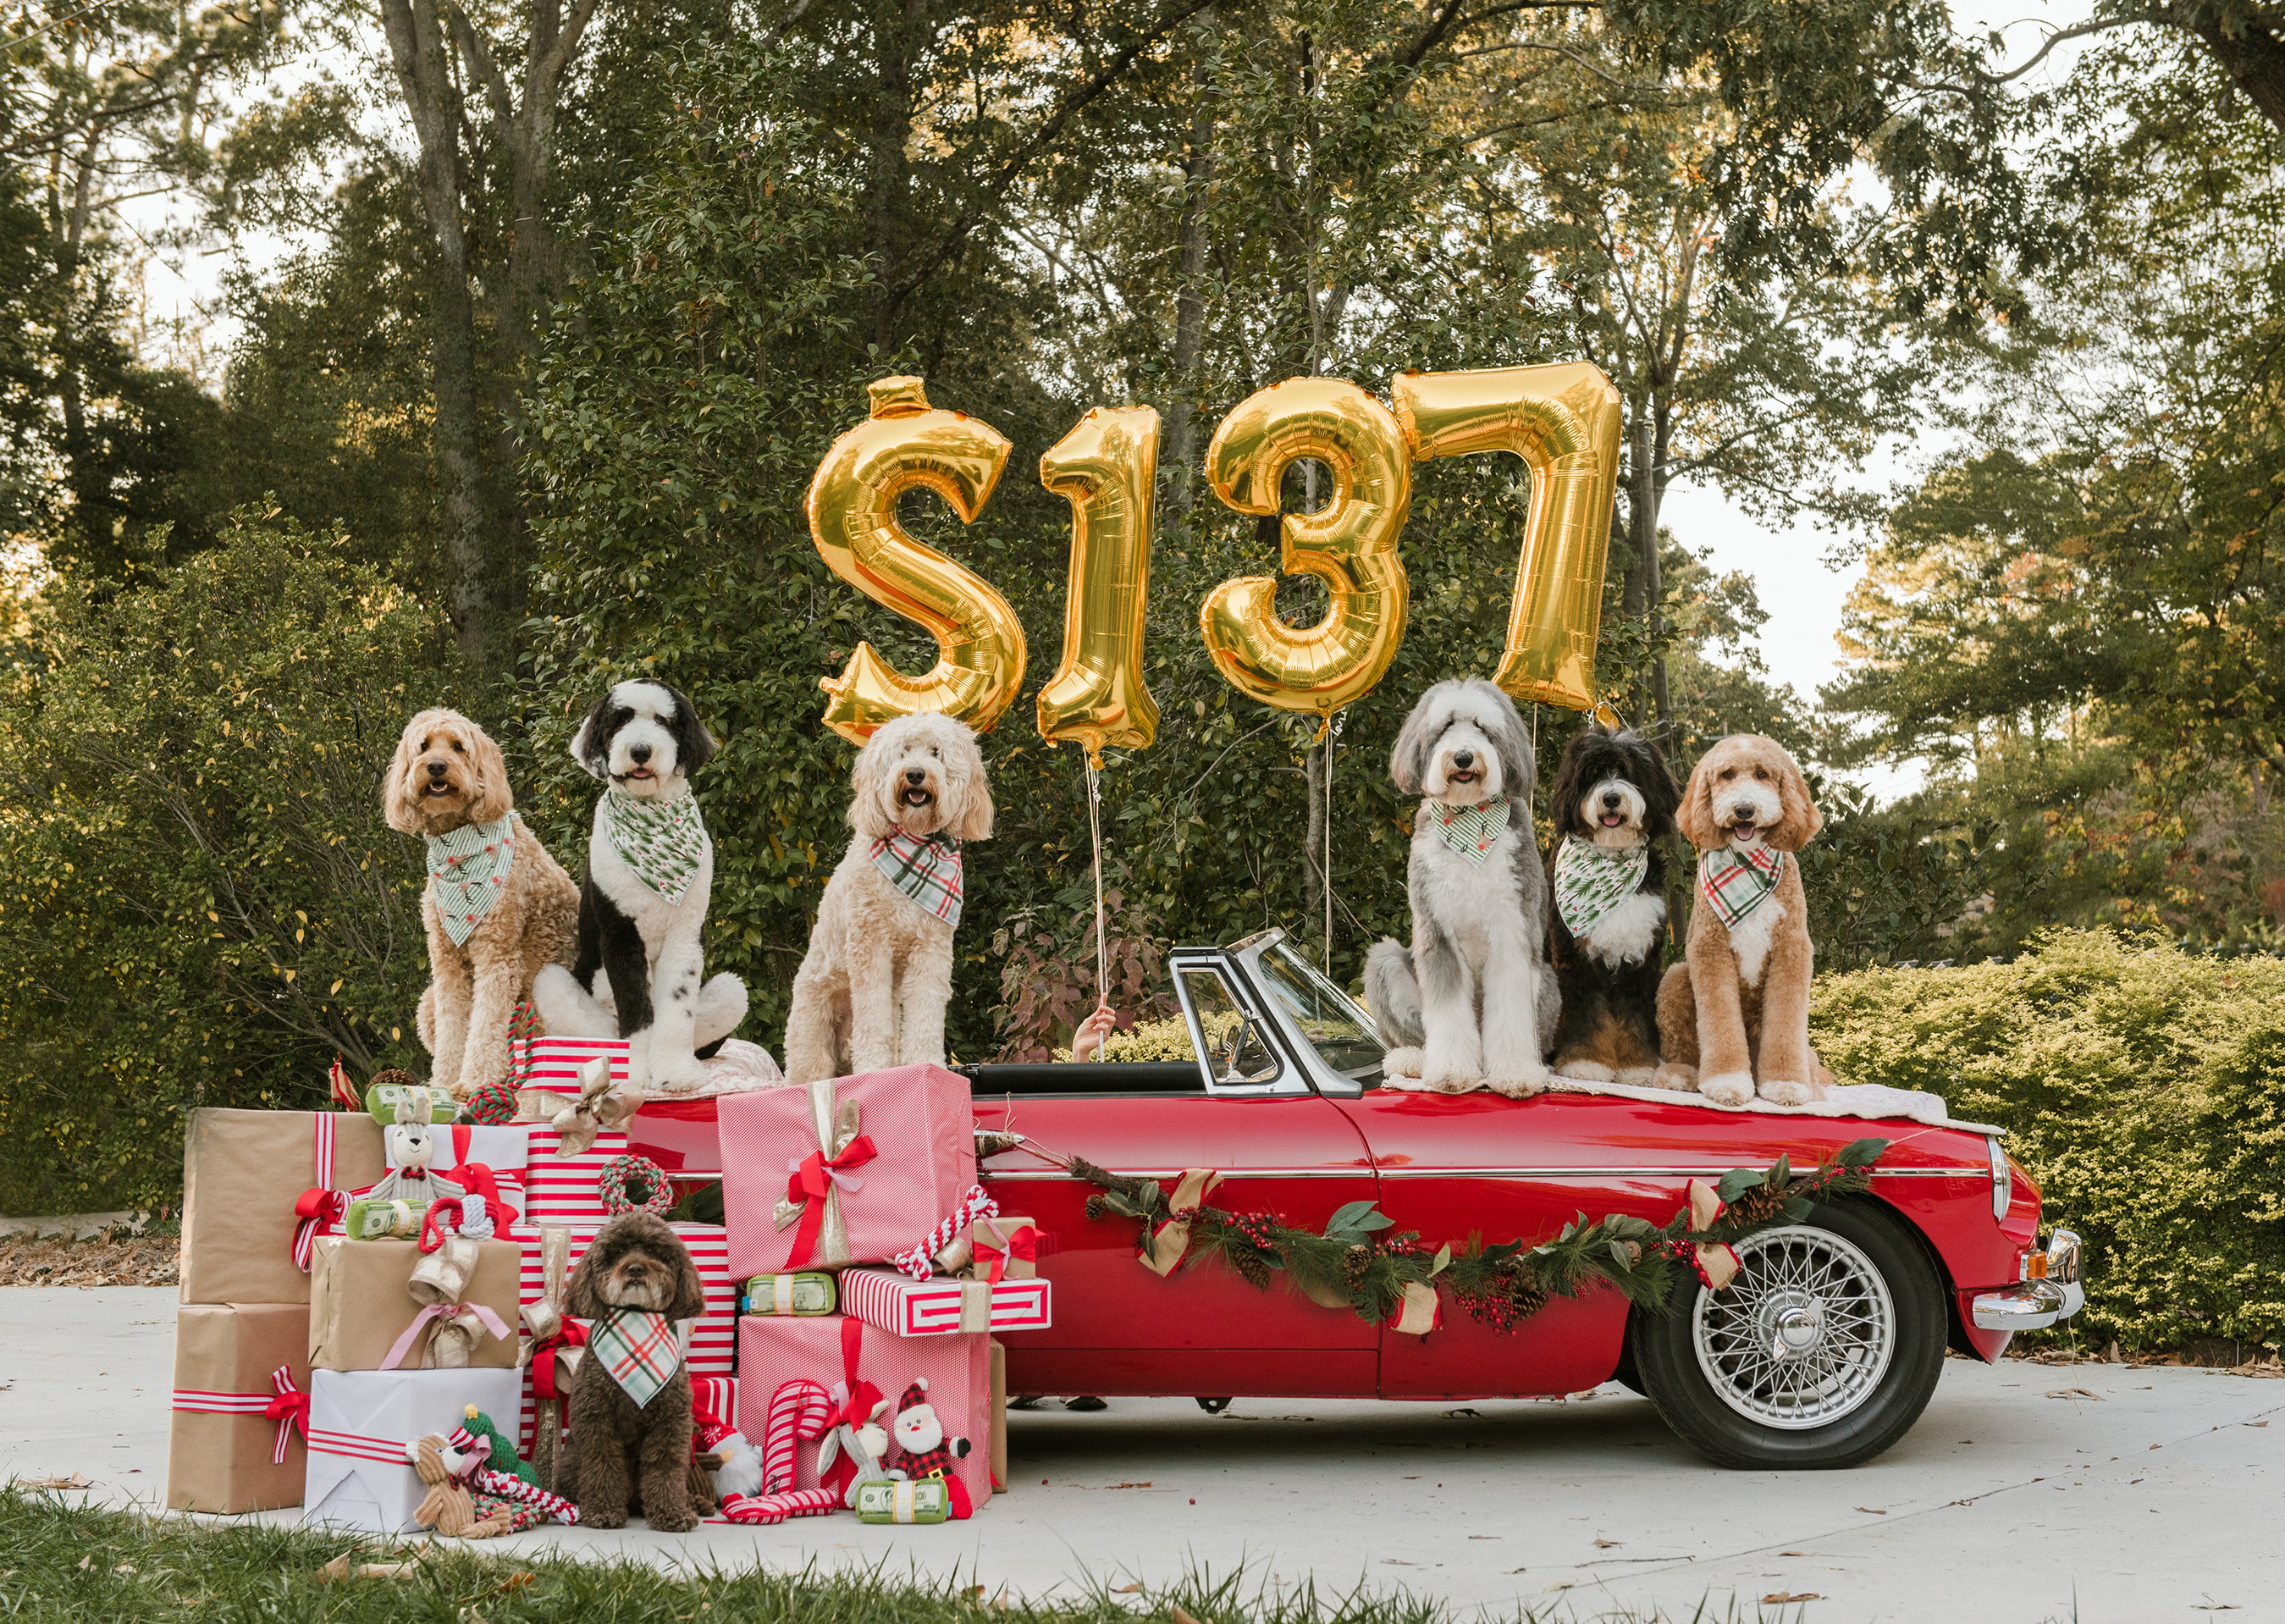 Half of Americans are planning to drop money on their pets this holiday season, spending an average of $137 on their four-legged family members. Photo credit: That Dood Squad, LLC